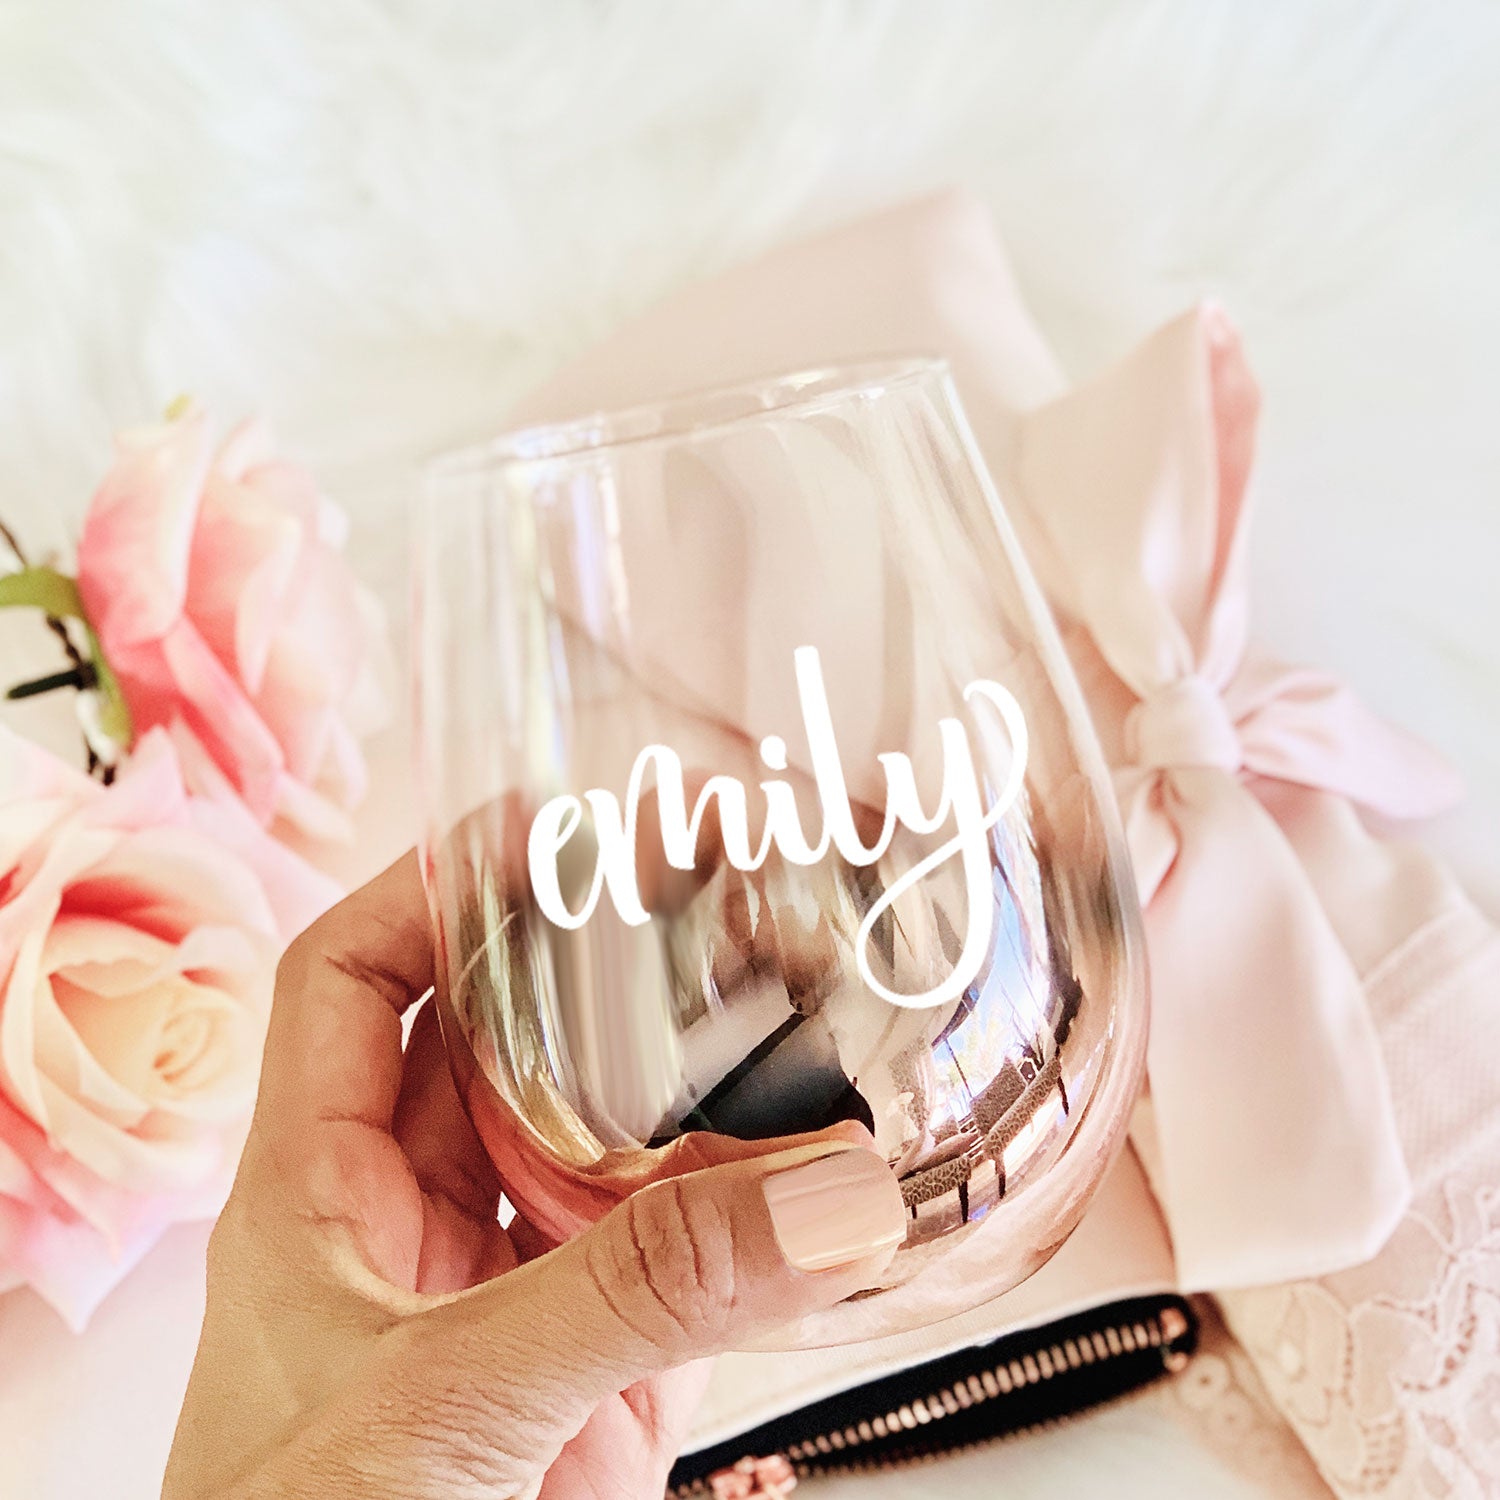 Rose Gold Wine Glass / Stainless Steel Wine Glass / Personalized Bridesmaid  Gift / Gifts for Her / Unbreakable Stem Glasses / Wedding Gifts 